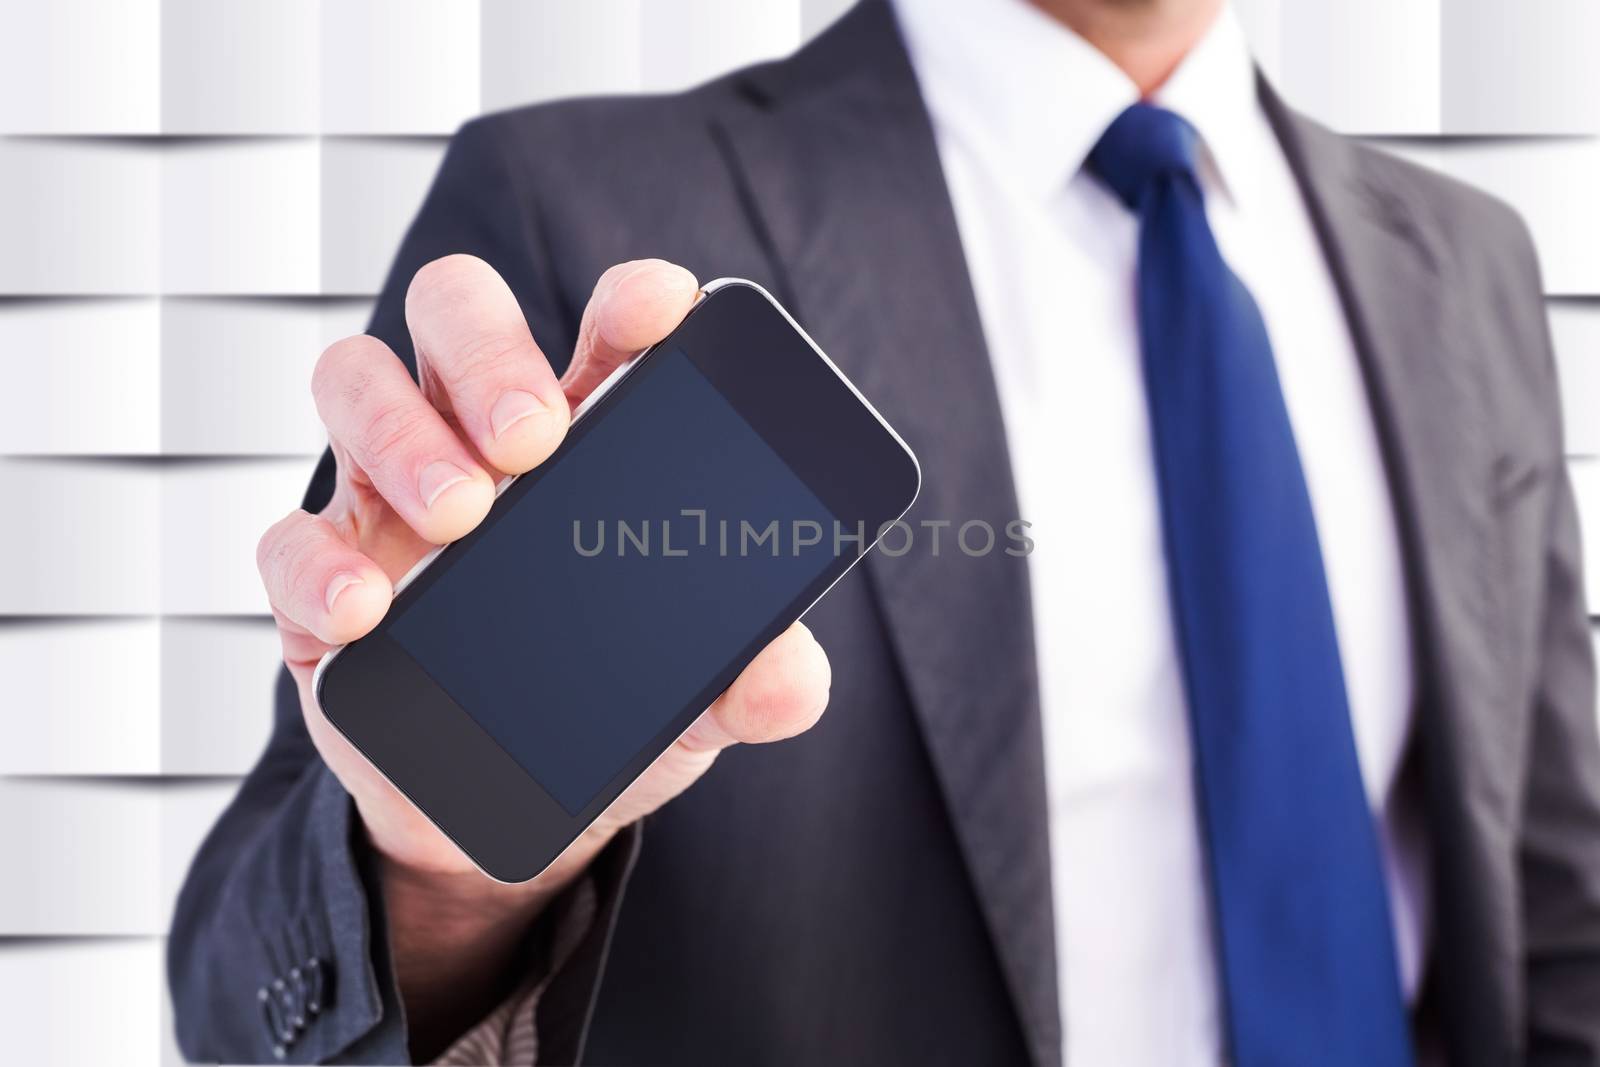 Businessman showing his smartphone screen against abstract background